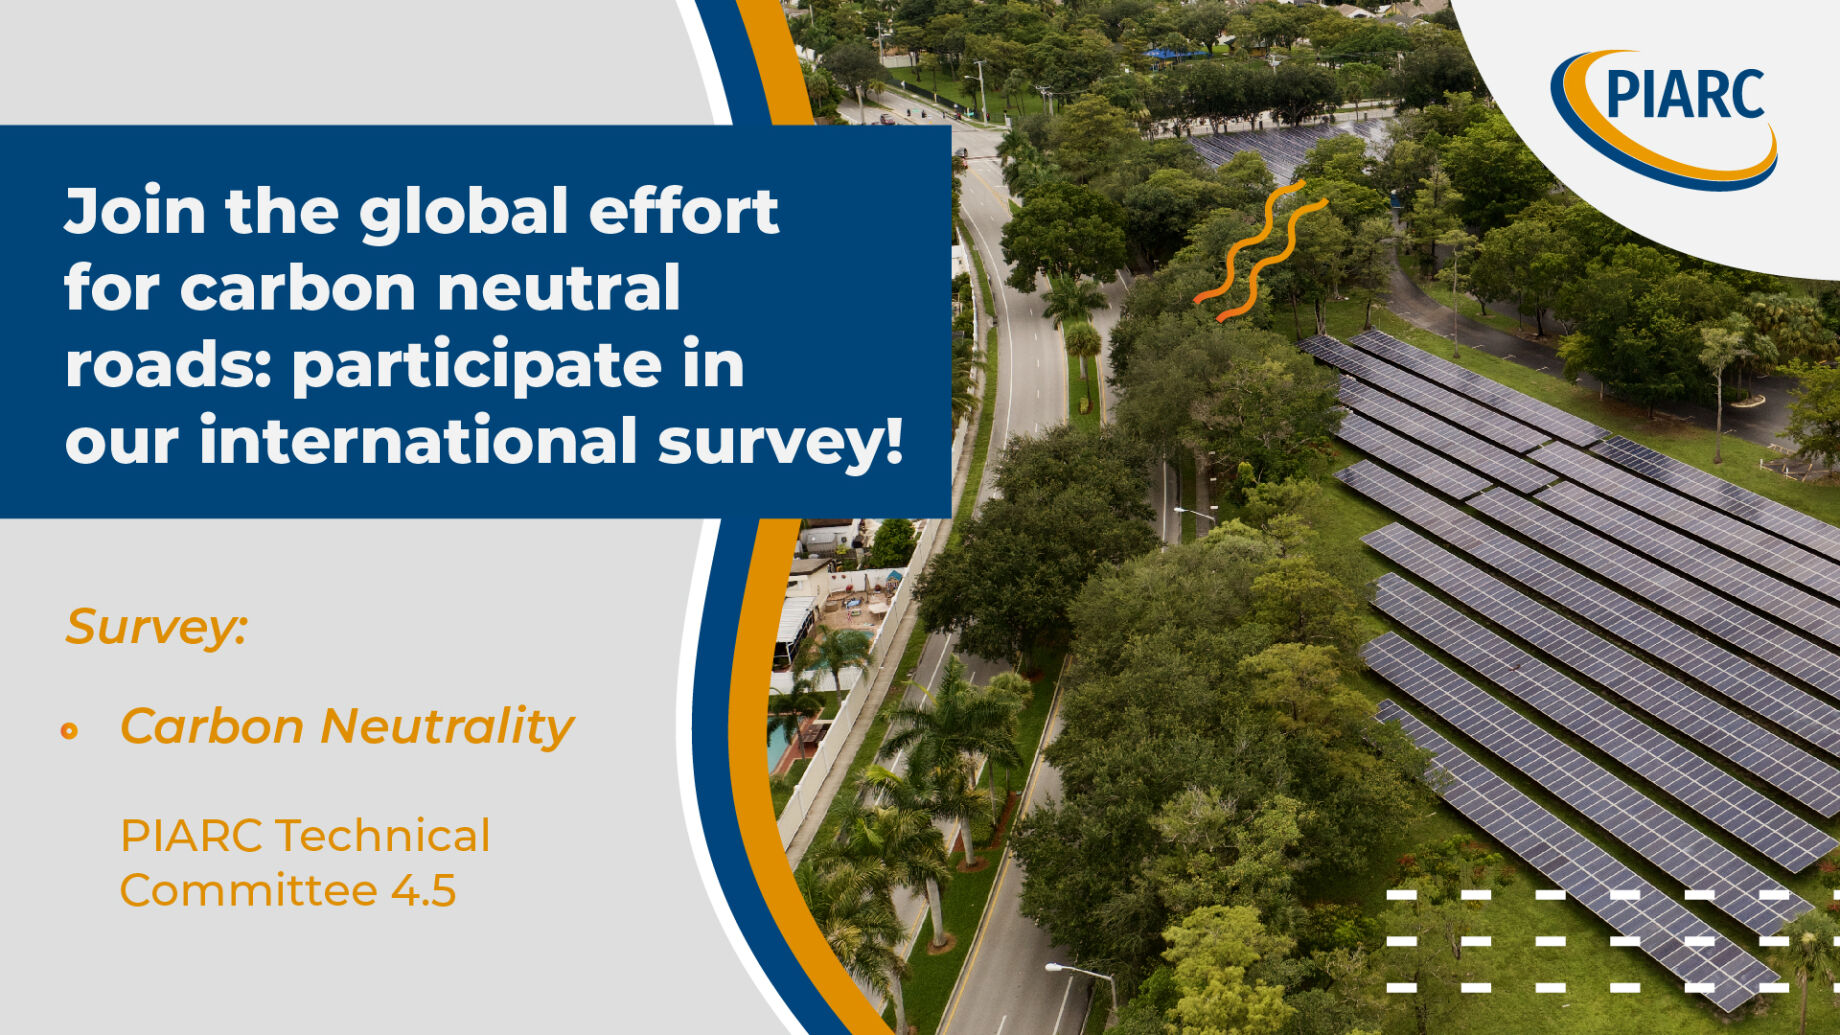 Join the global effort for carbon neutral roads: participate in our international survey!